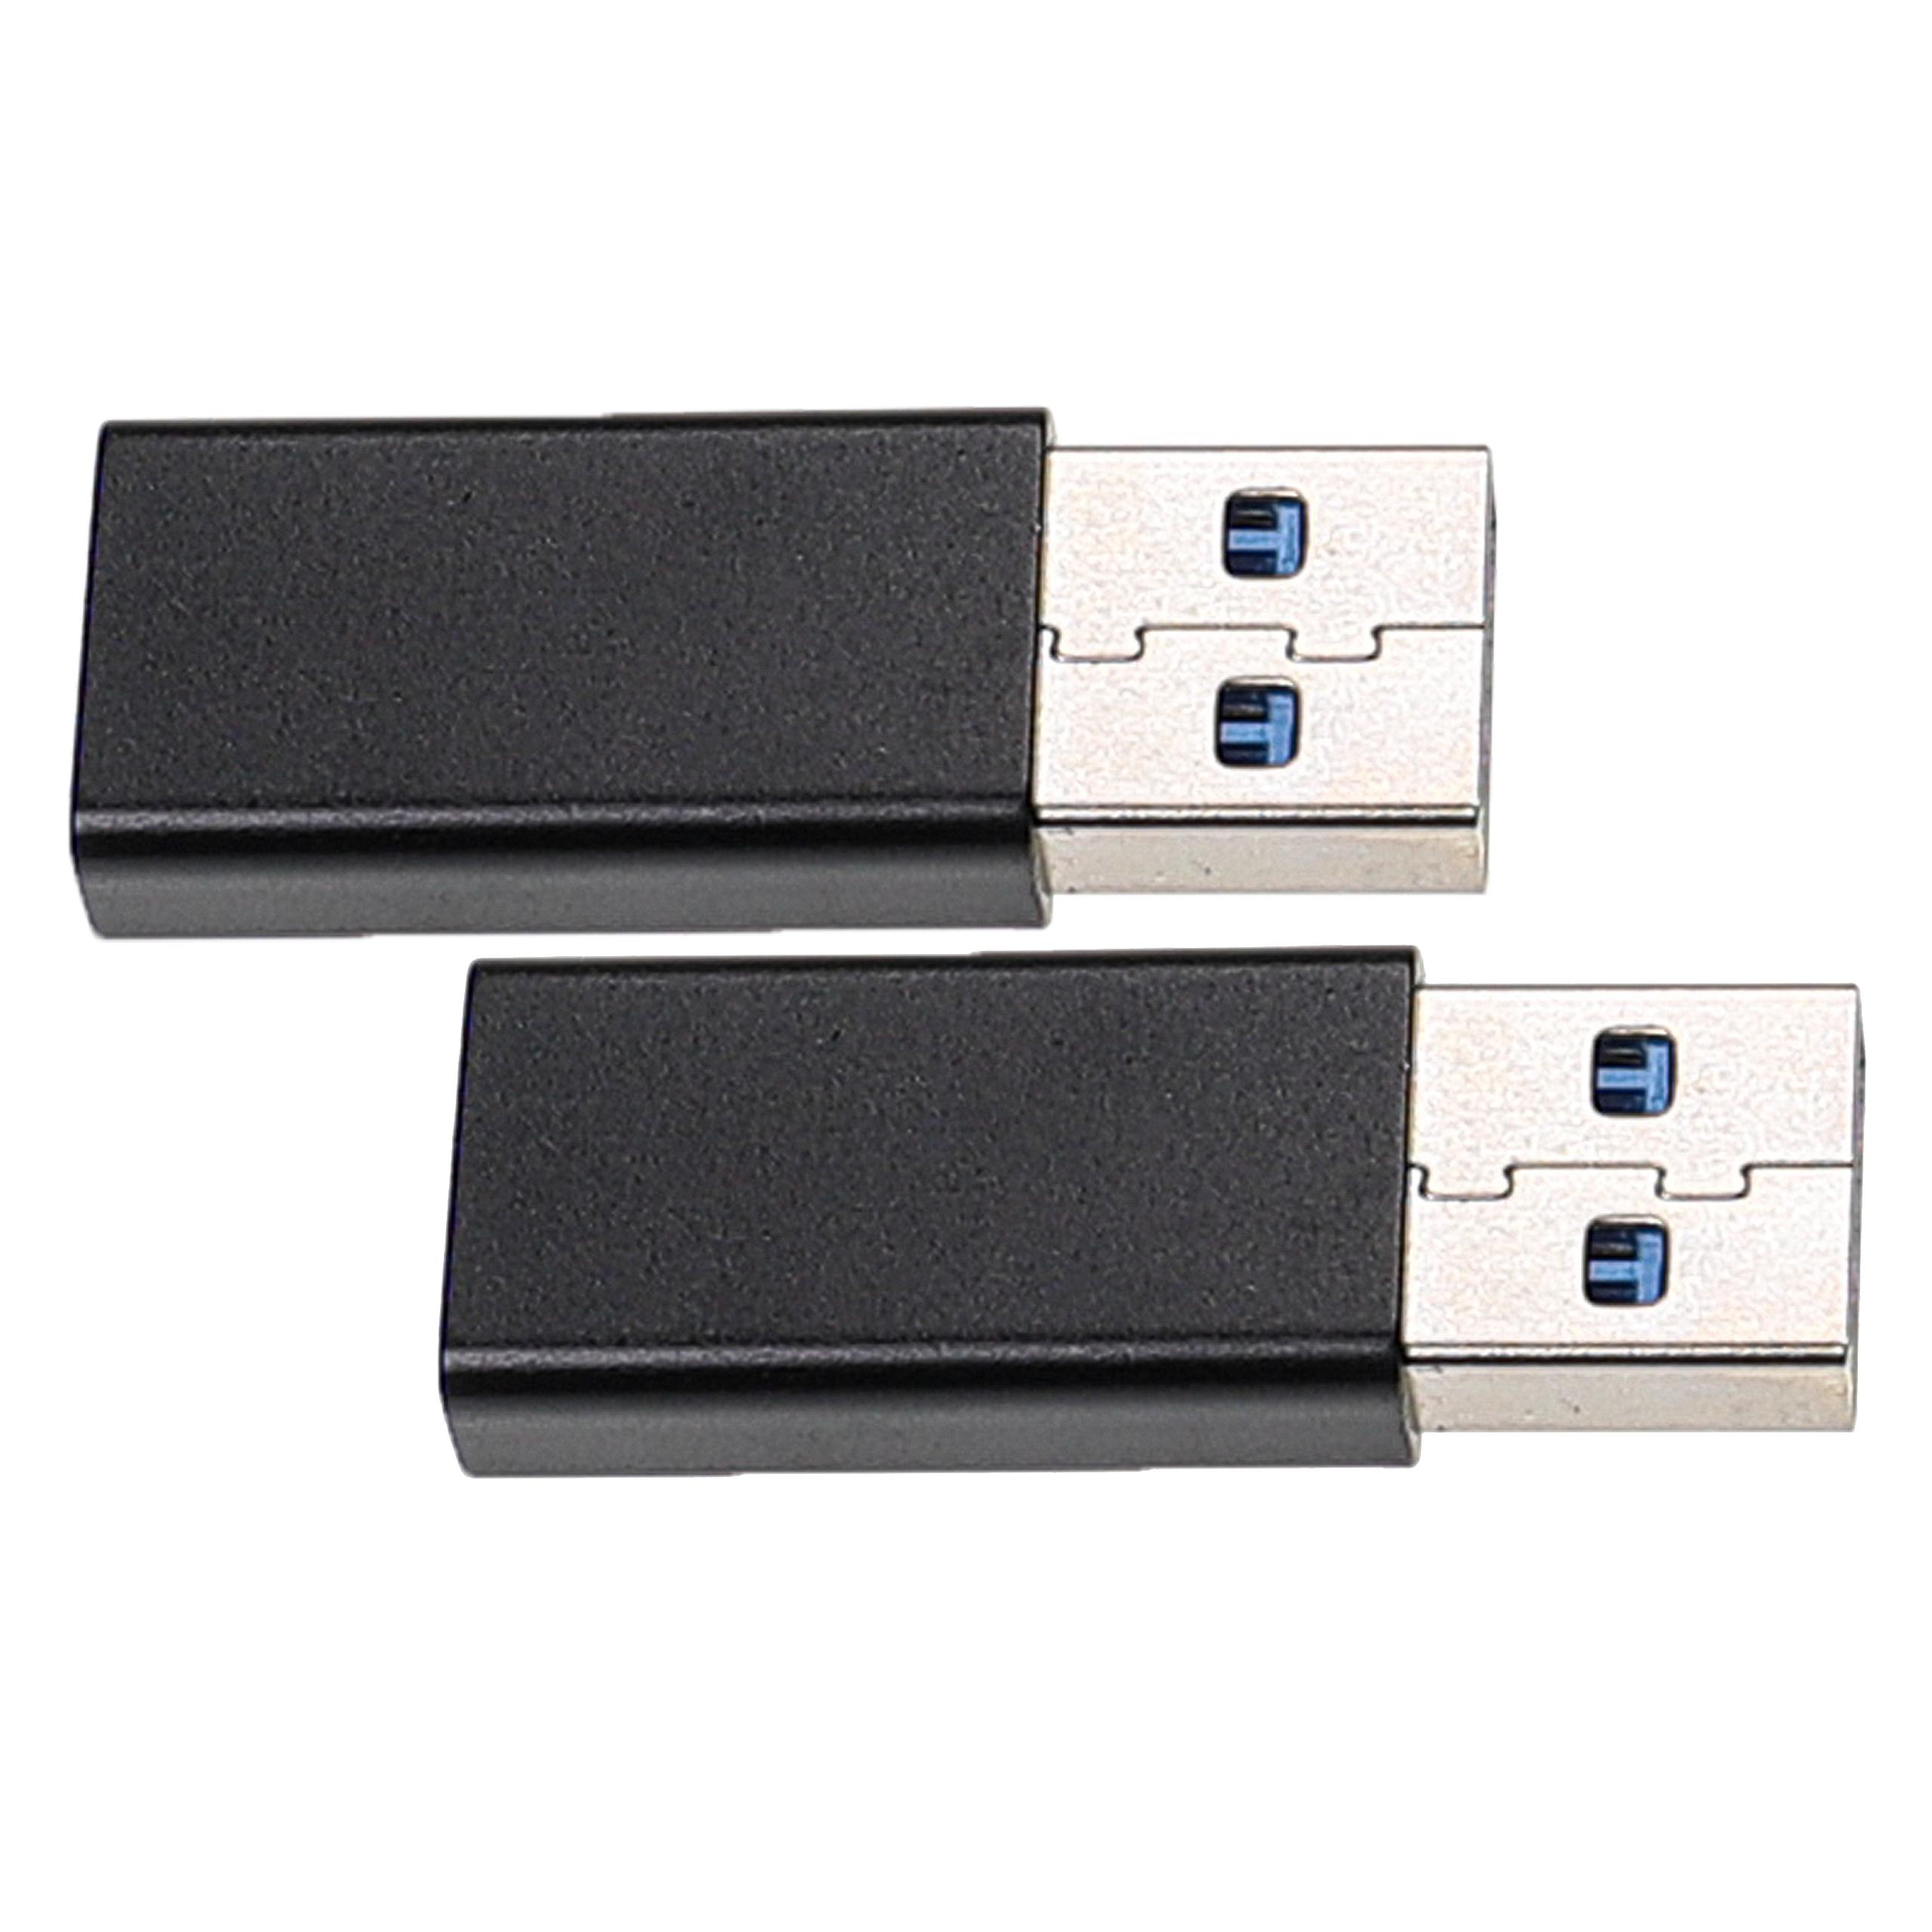 2x Adapter USB Type C (f) to USB 3.0 (m) suitable for Smartphone, Tablet, Notebook - USB Adapter Black